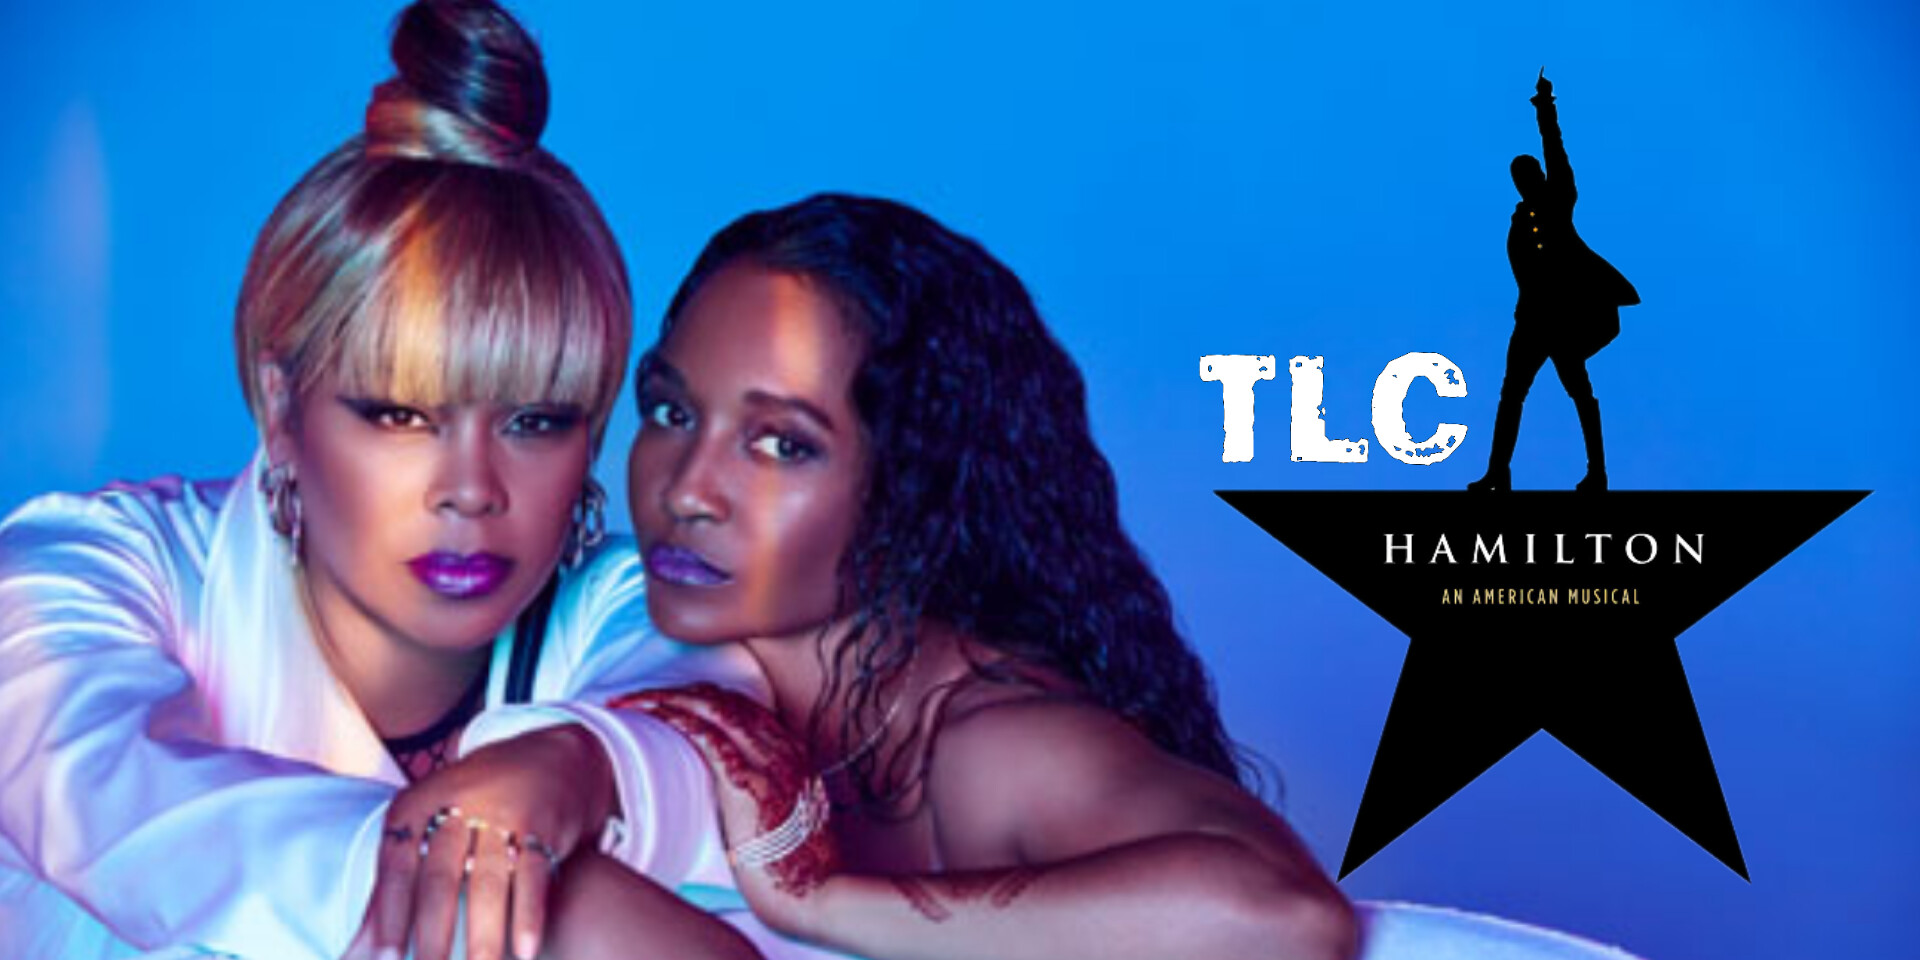 TLC Working With Hamilton Musical For Their Upcoming Musical, Plan New TLC Music & TV Show